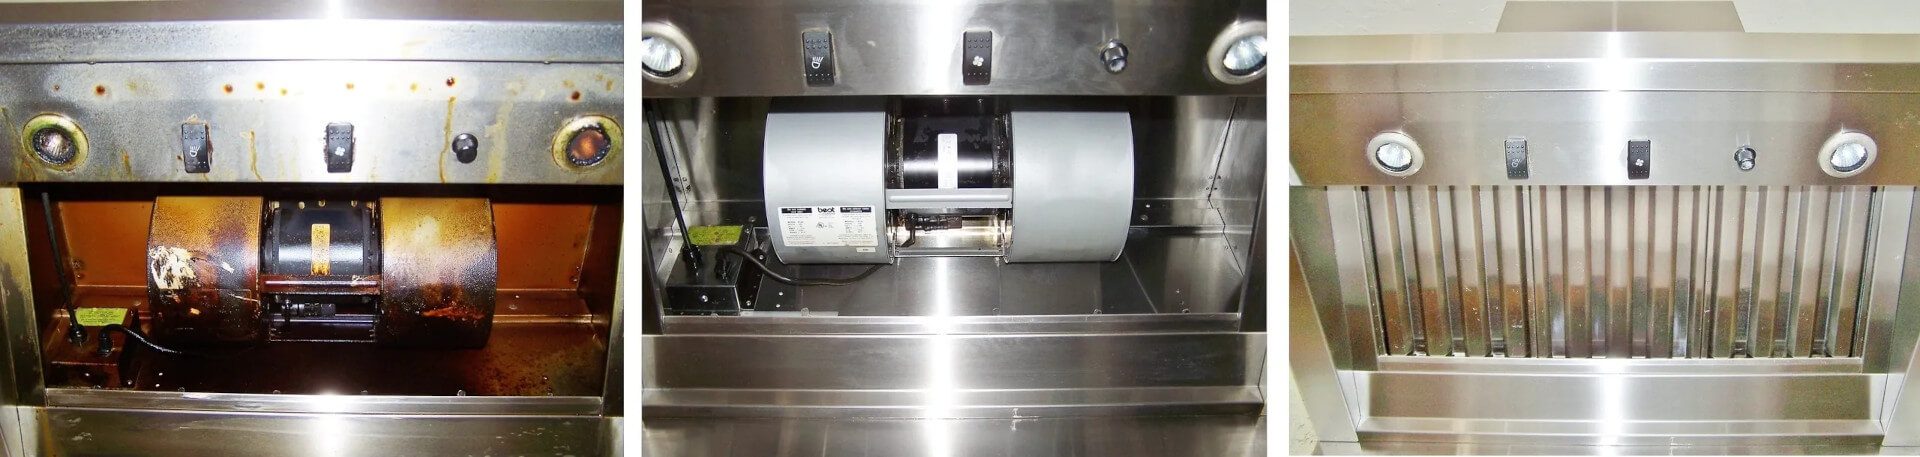 A machine that is on the floor of a kitchen.